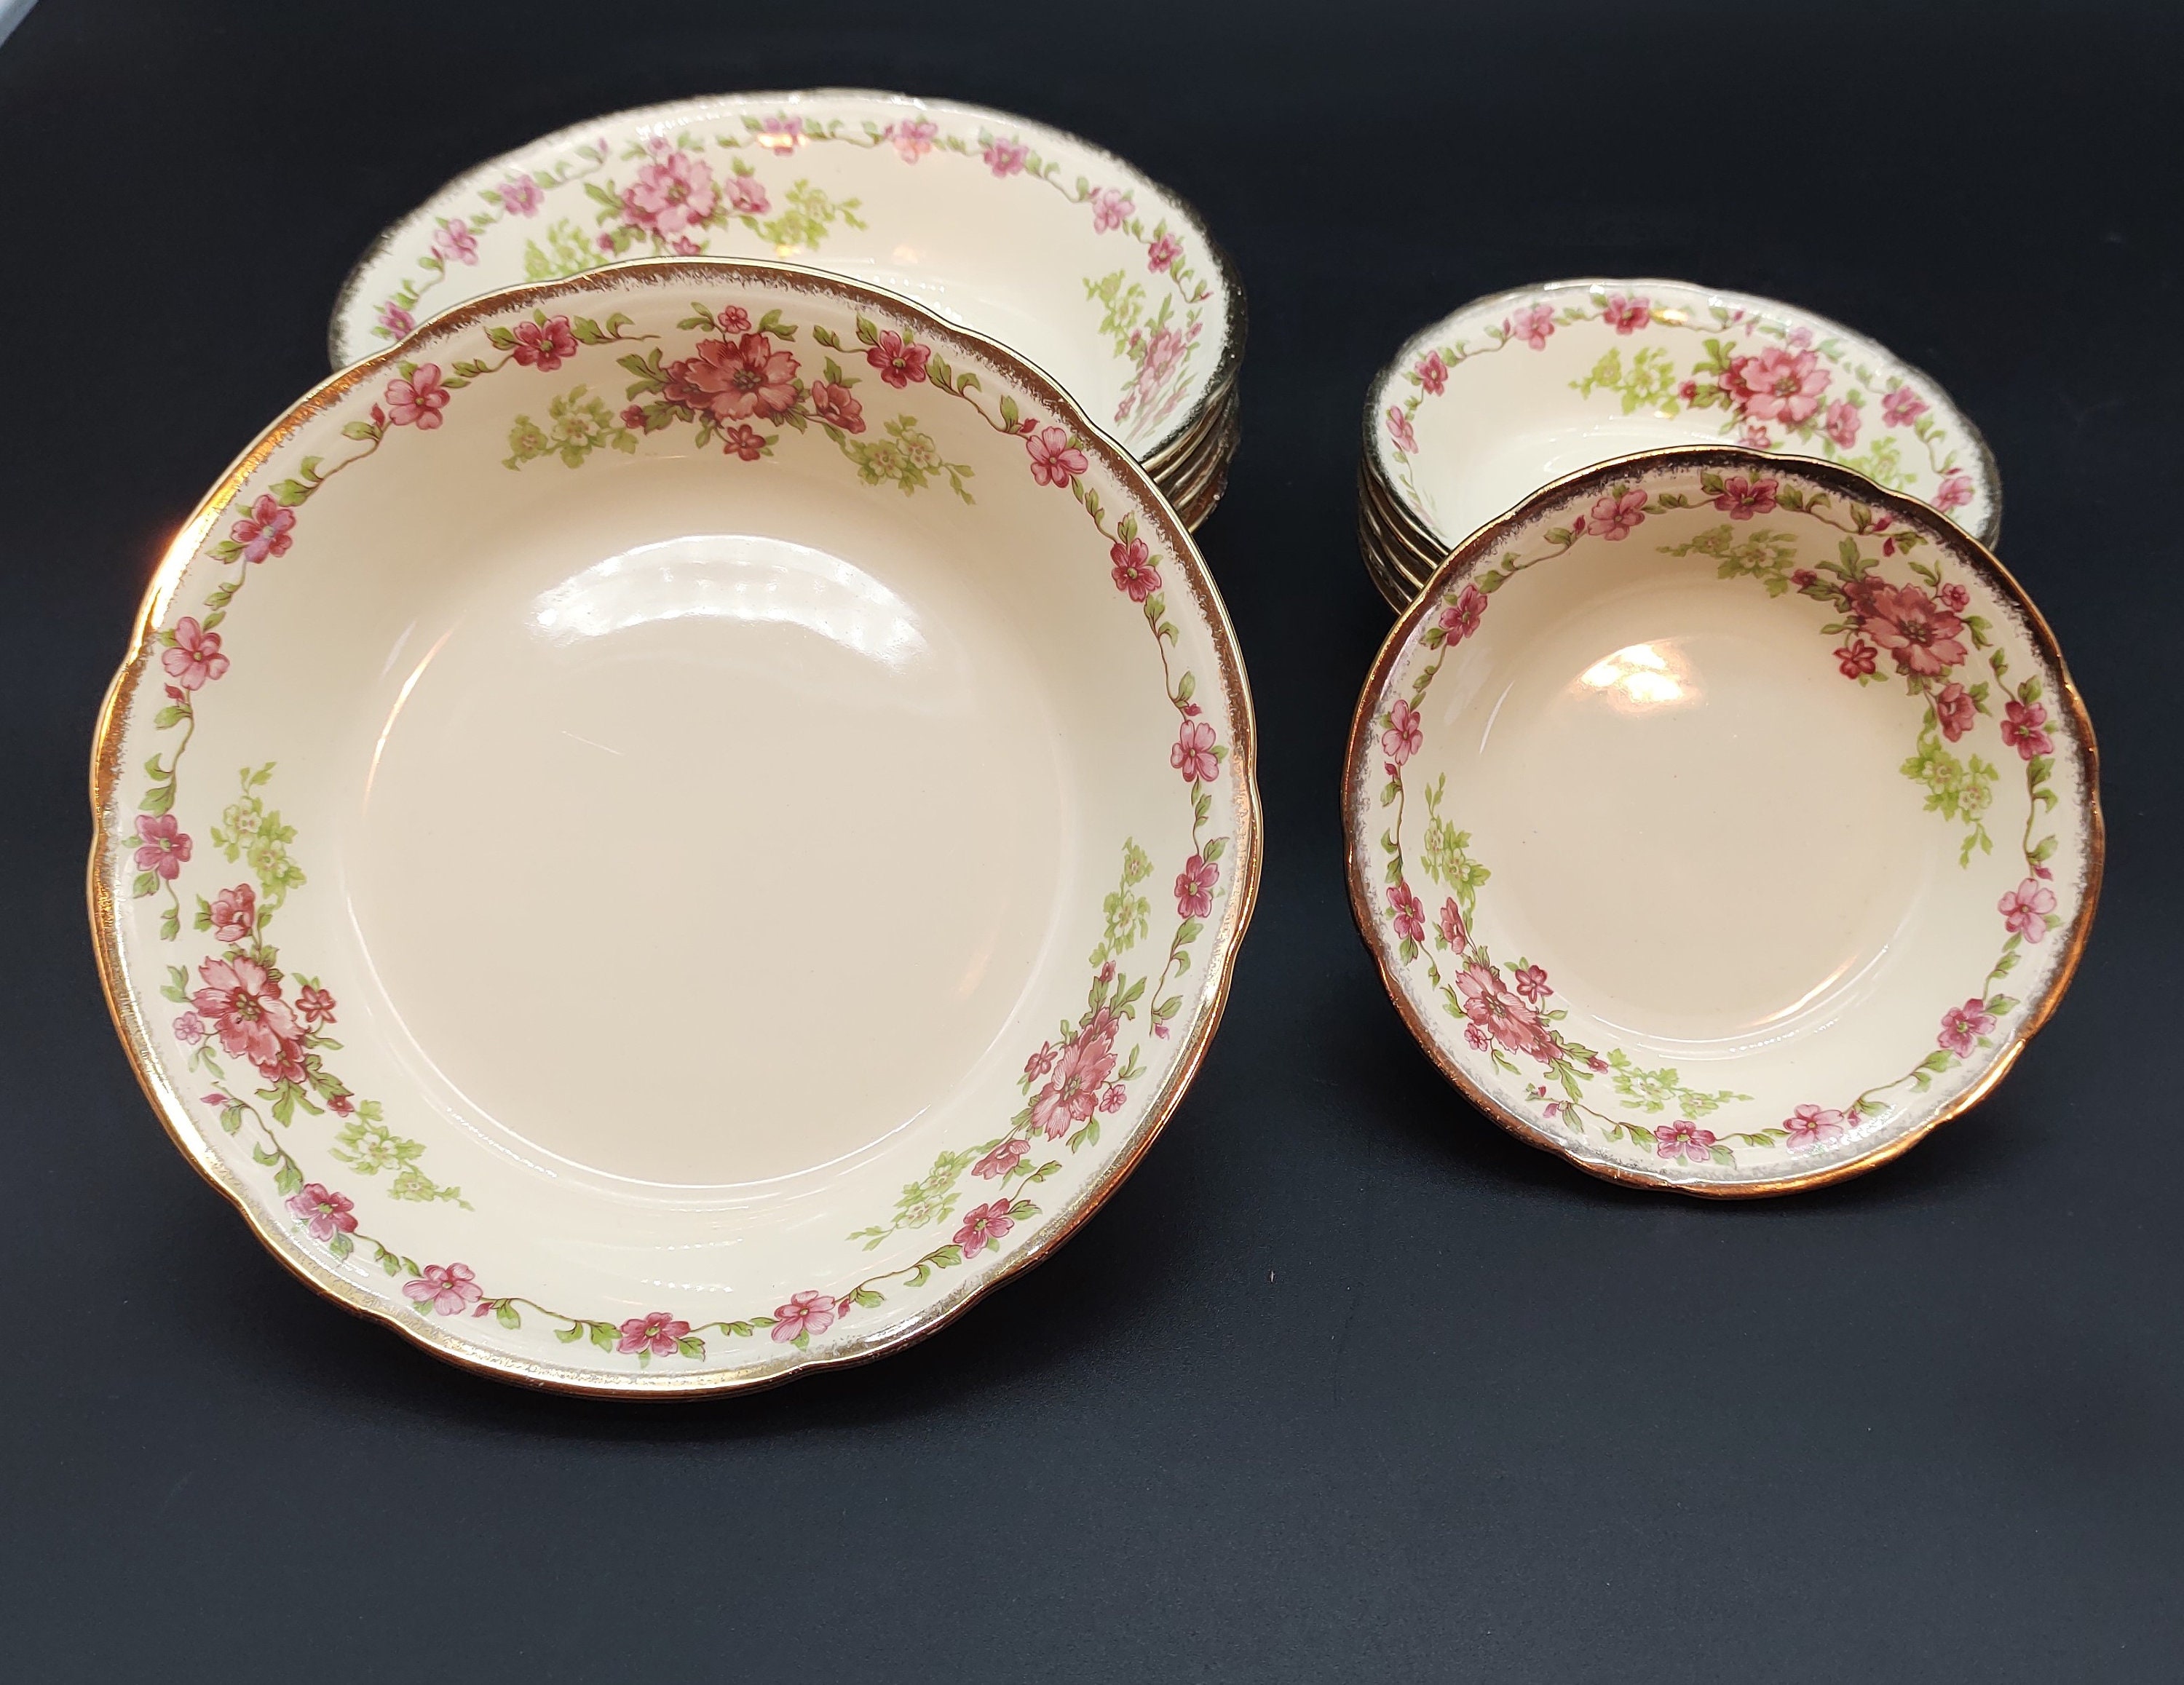 6 Place Dinner Set Alfred Meakin Royal Marigold Rosecliffe - Etsy Australia